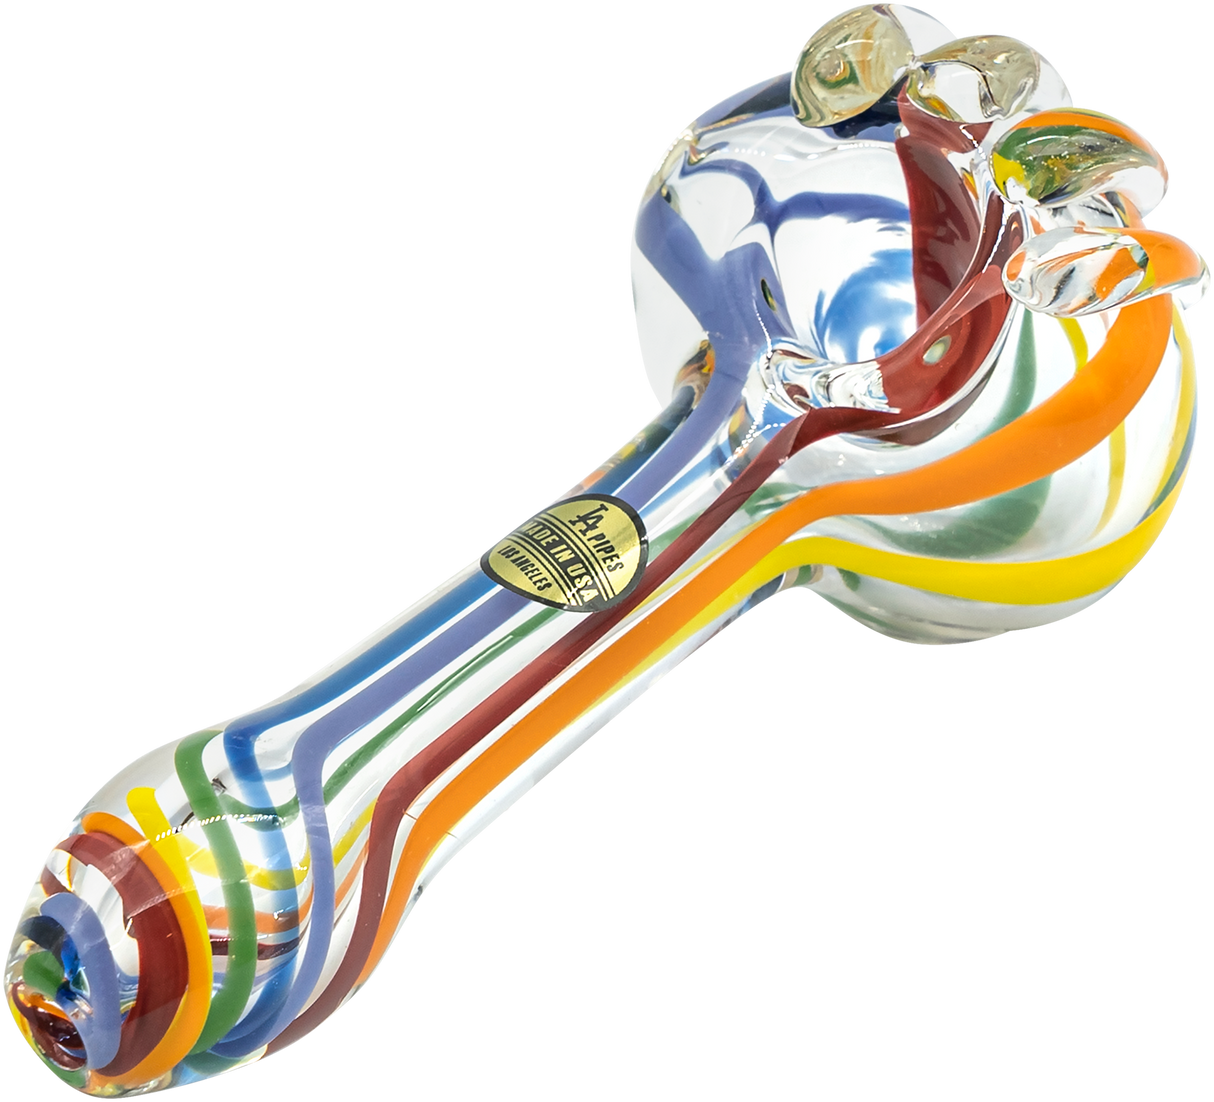 LA Pipes Rainbow Ripper Spoon Pipe, 4.35" Borosilicate Glass, USA-made, for Dry Herbs